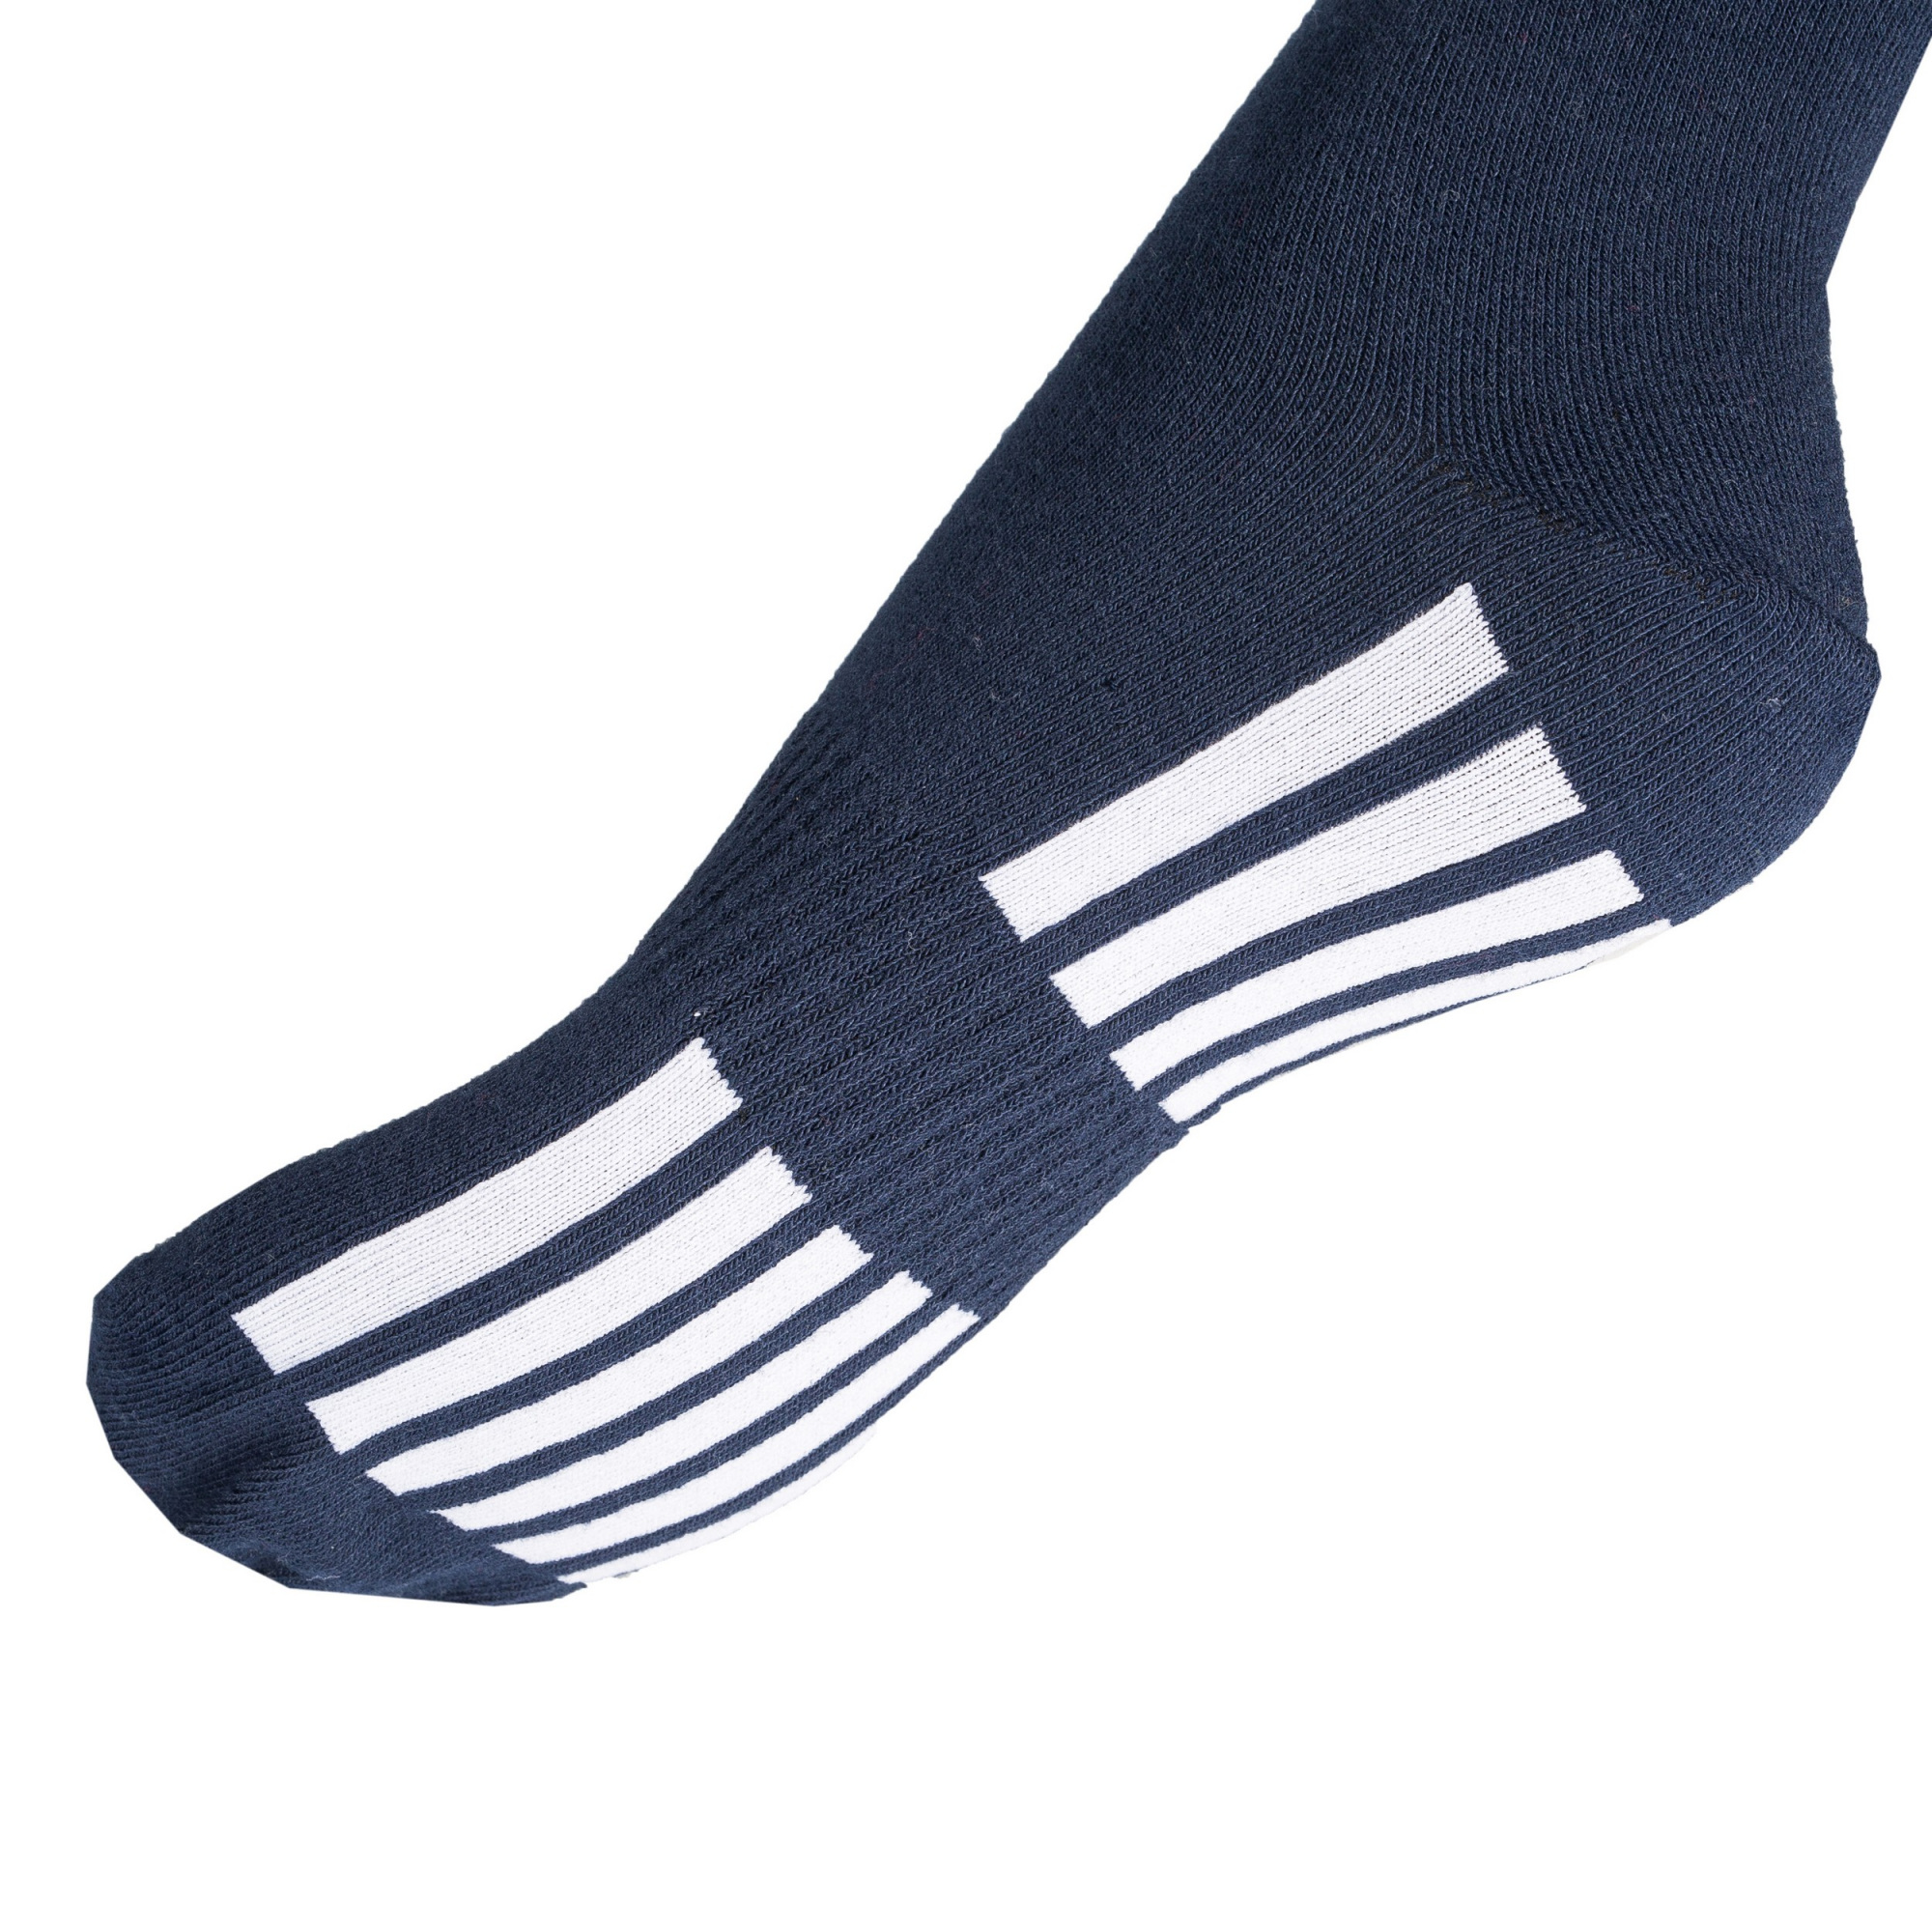 Horze Pack Of 2 Competition Socks Riding Navy All Sizes